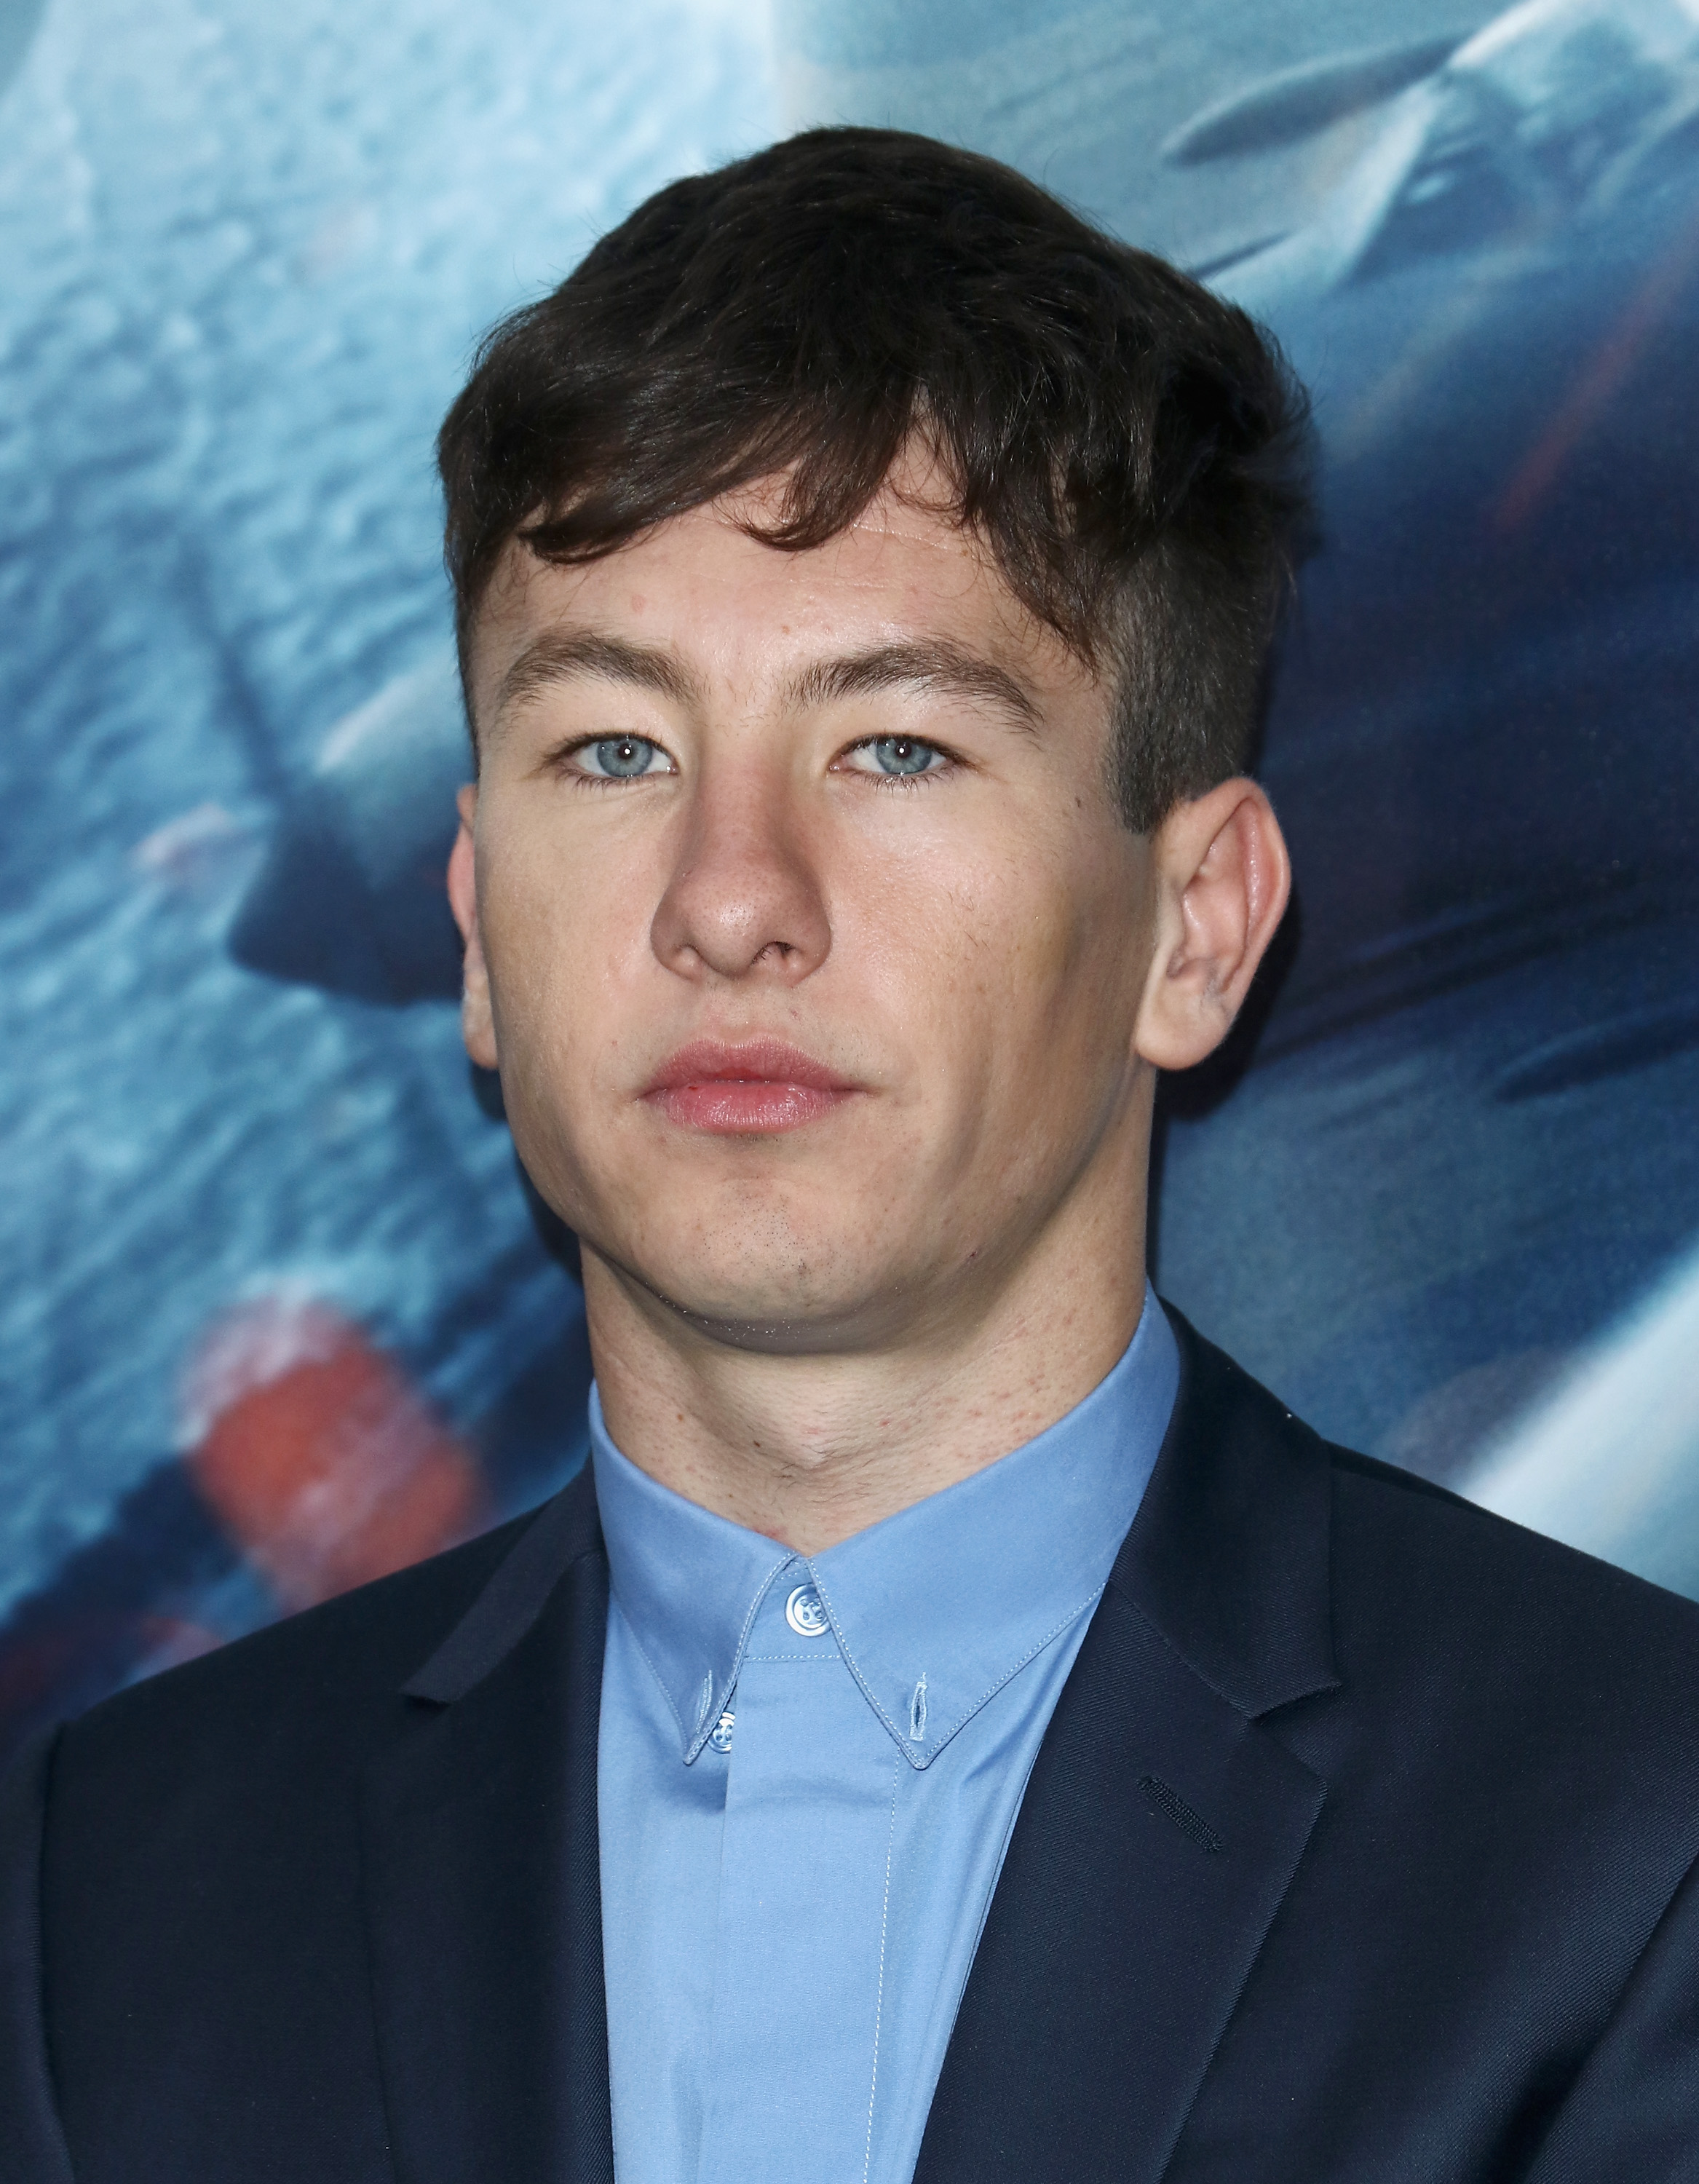 Barry Keoghan attends the "Dunkirk" premiere on July 18, 2017 in New York City | Source: Getty Images